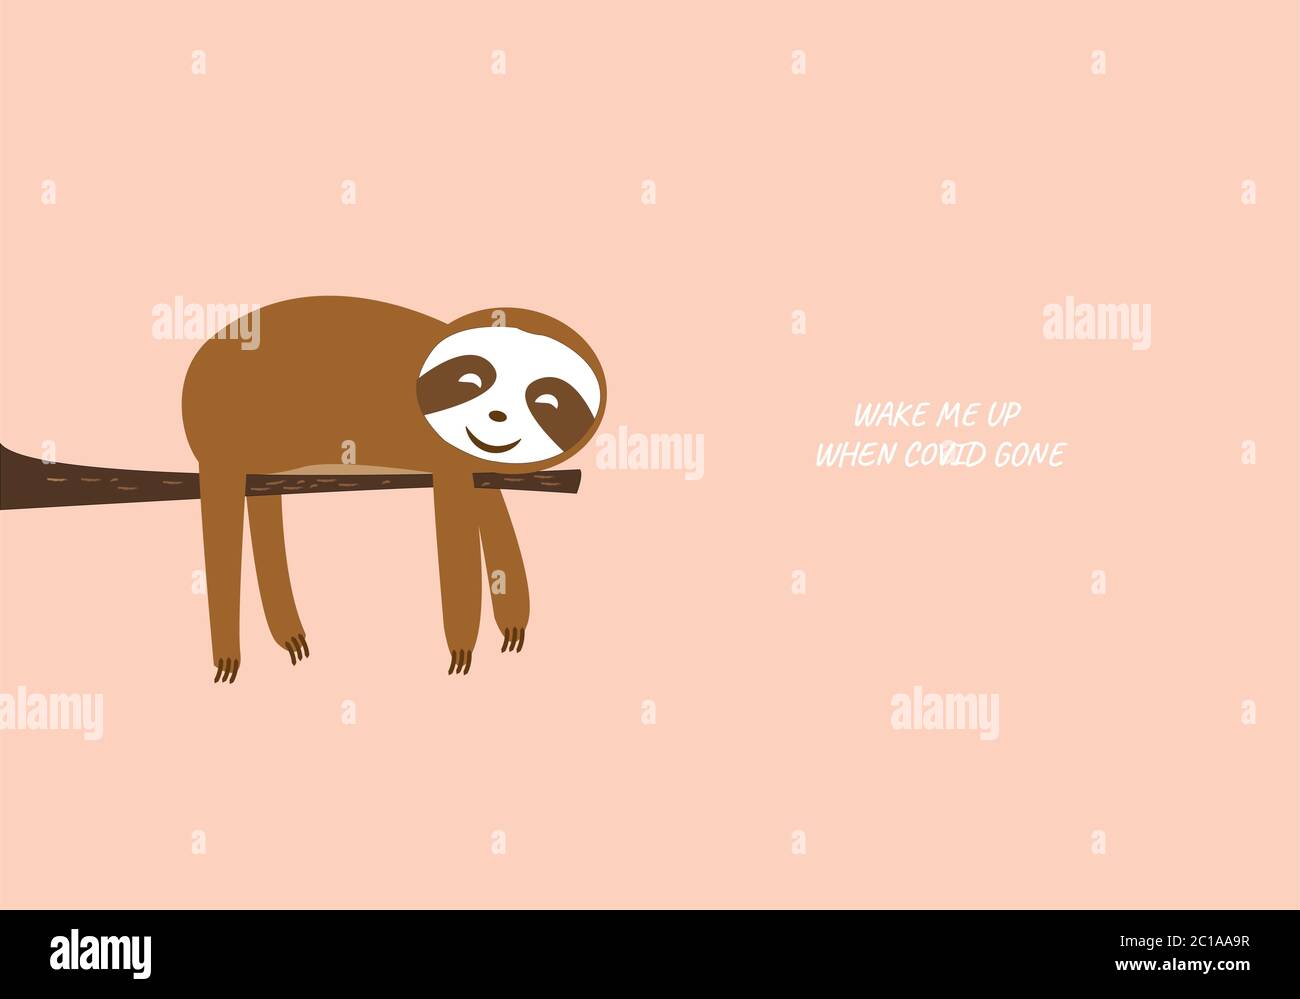 Cute sloth happy sleeping on tree branch vector illustration graphic with space for text and sentence, wake me up when COVID gone. Stock Vector